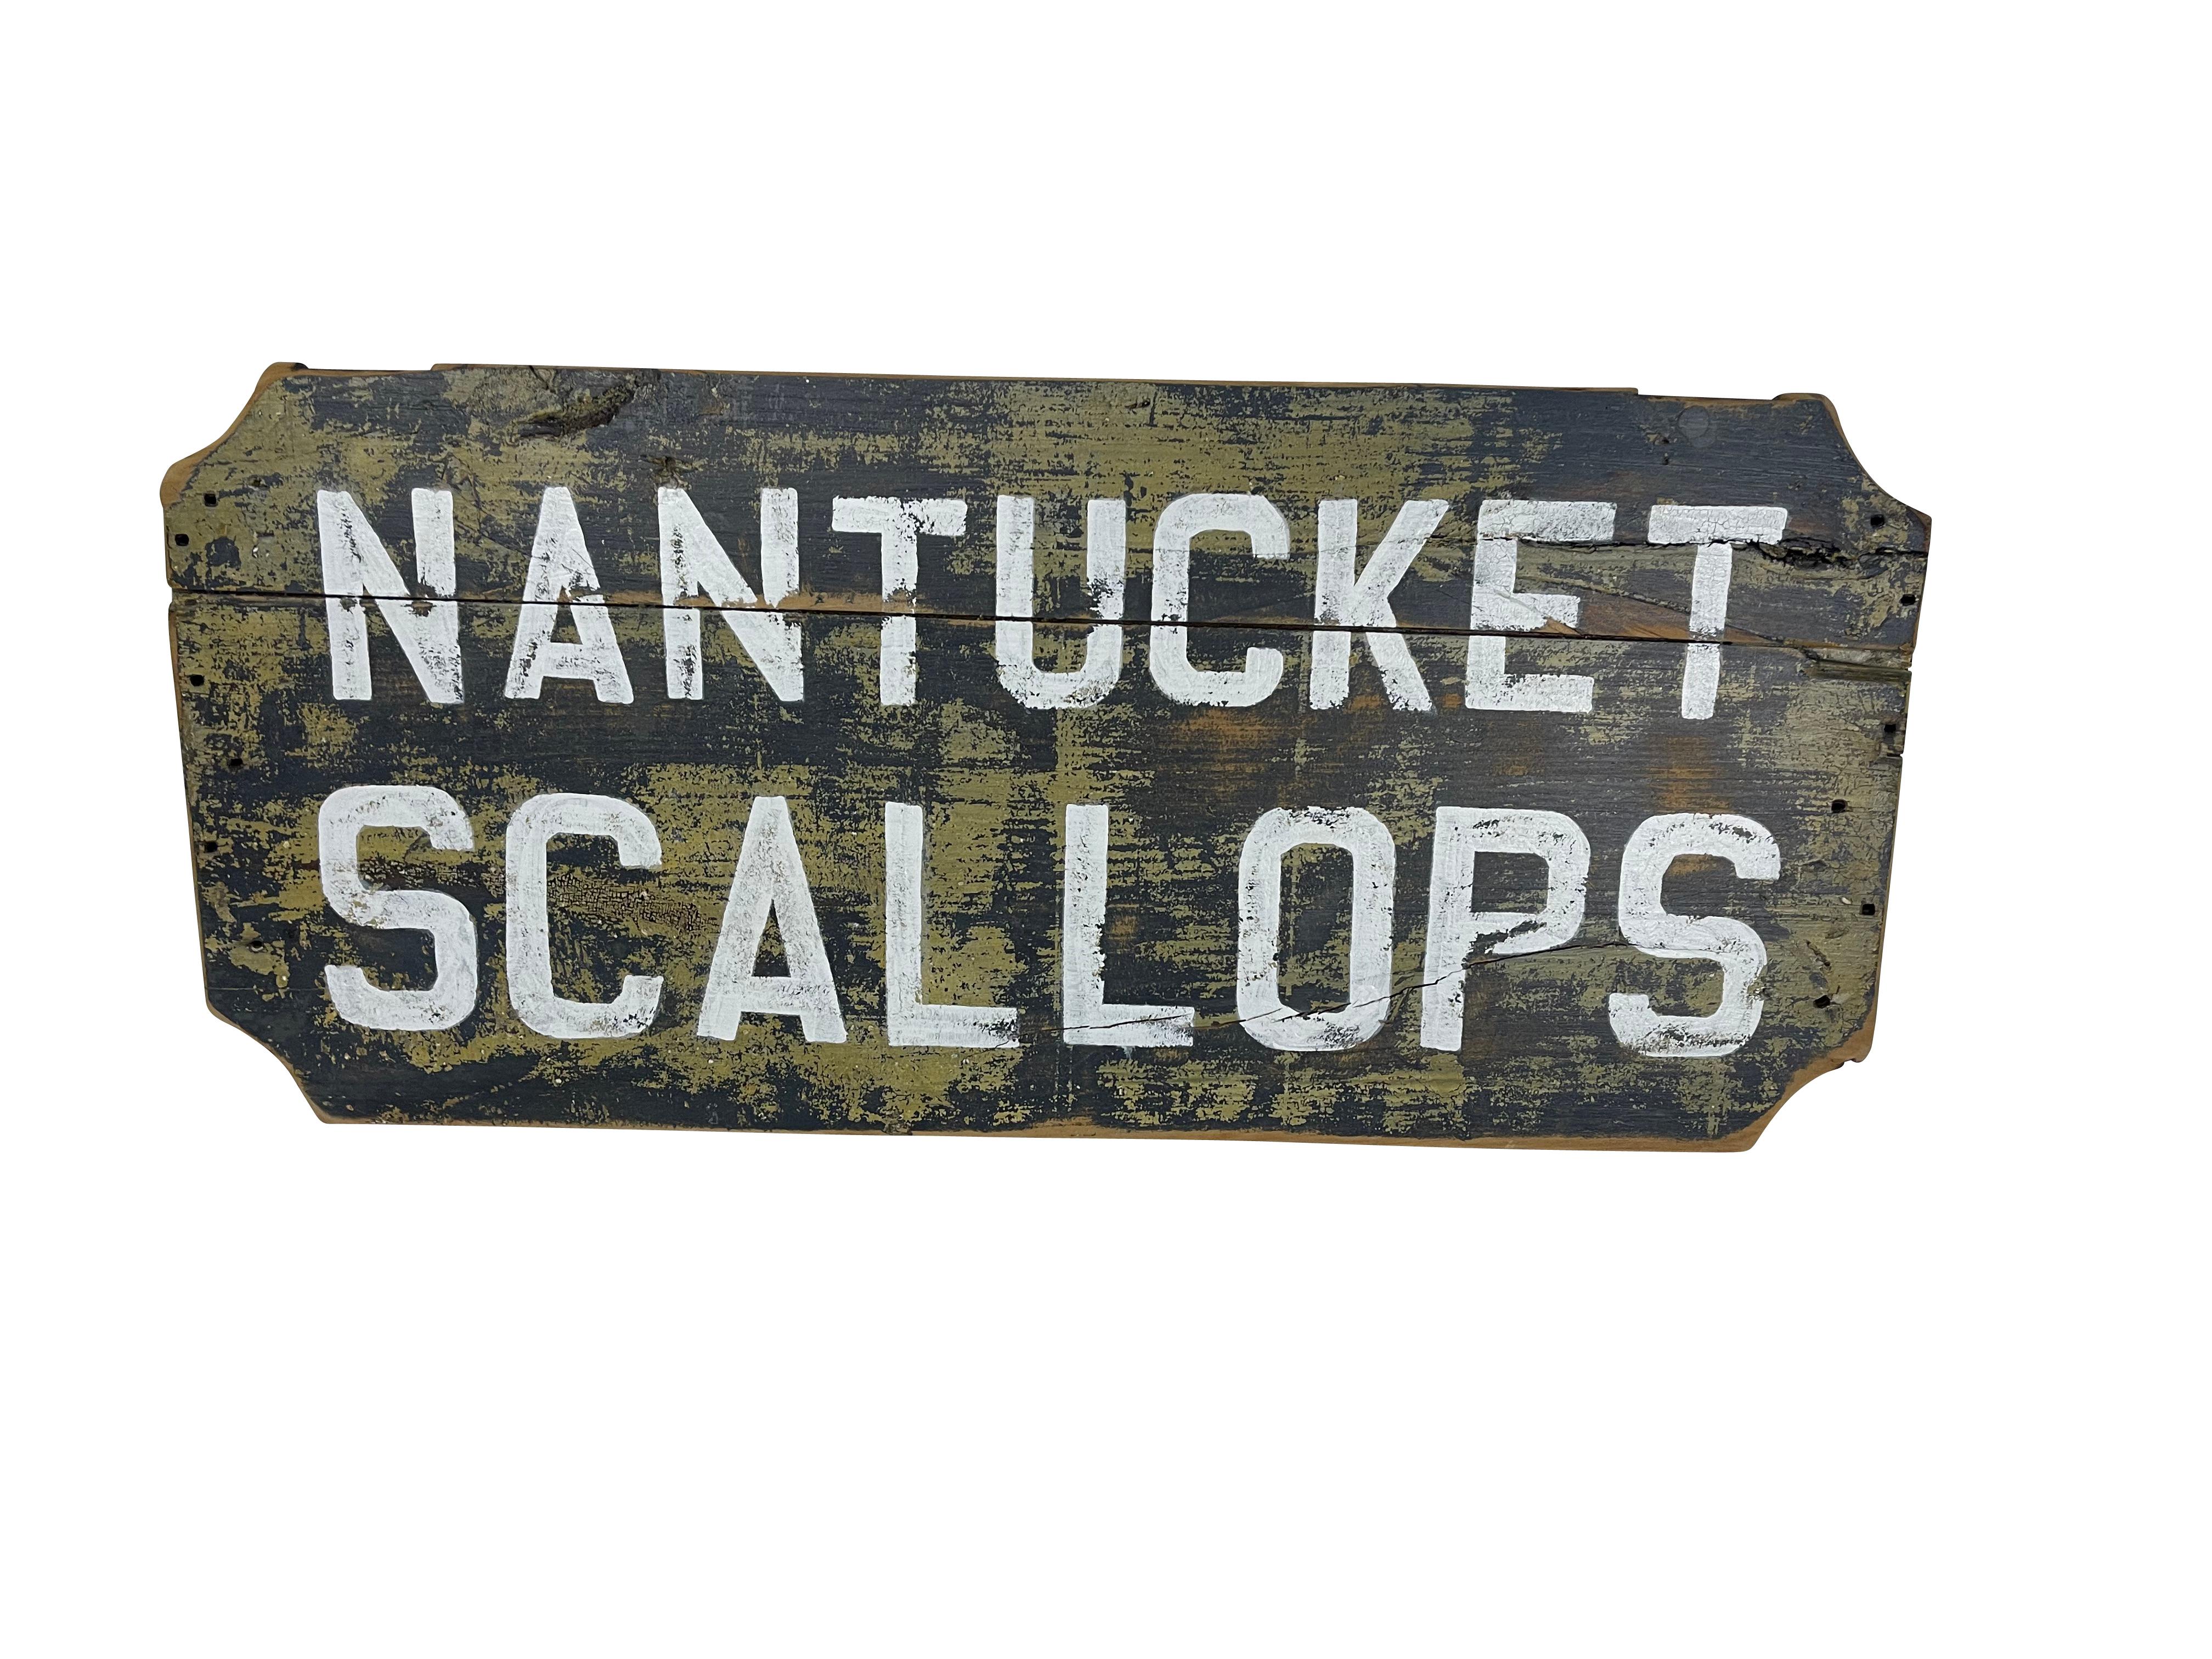 Excellent old Nantucket Scallop sign with notched corners on old wood with white hand-painted letting.  The back is covered with old newspaper. Old wood shows wear and cracking, which adds to its charm.  Ready to hand on your beach house wall!